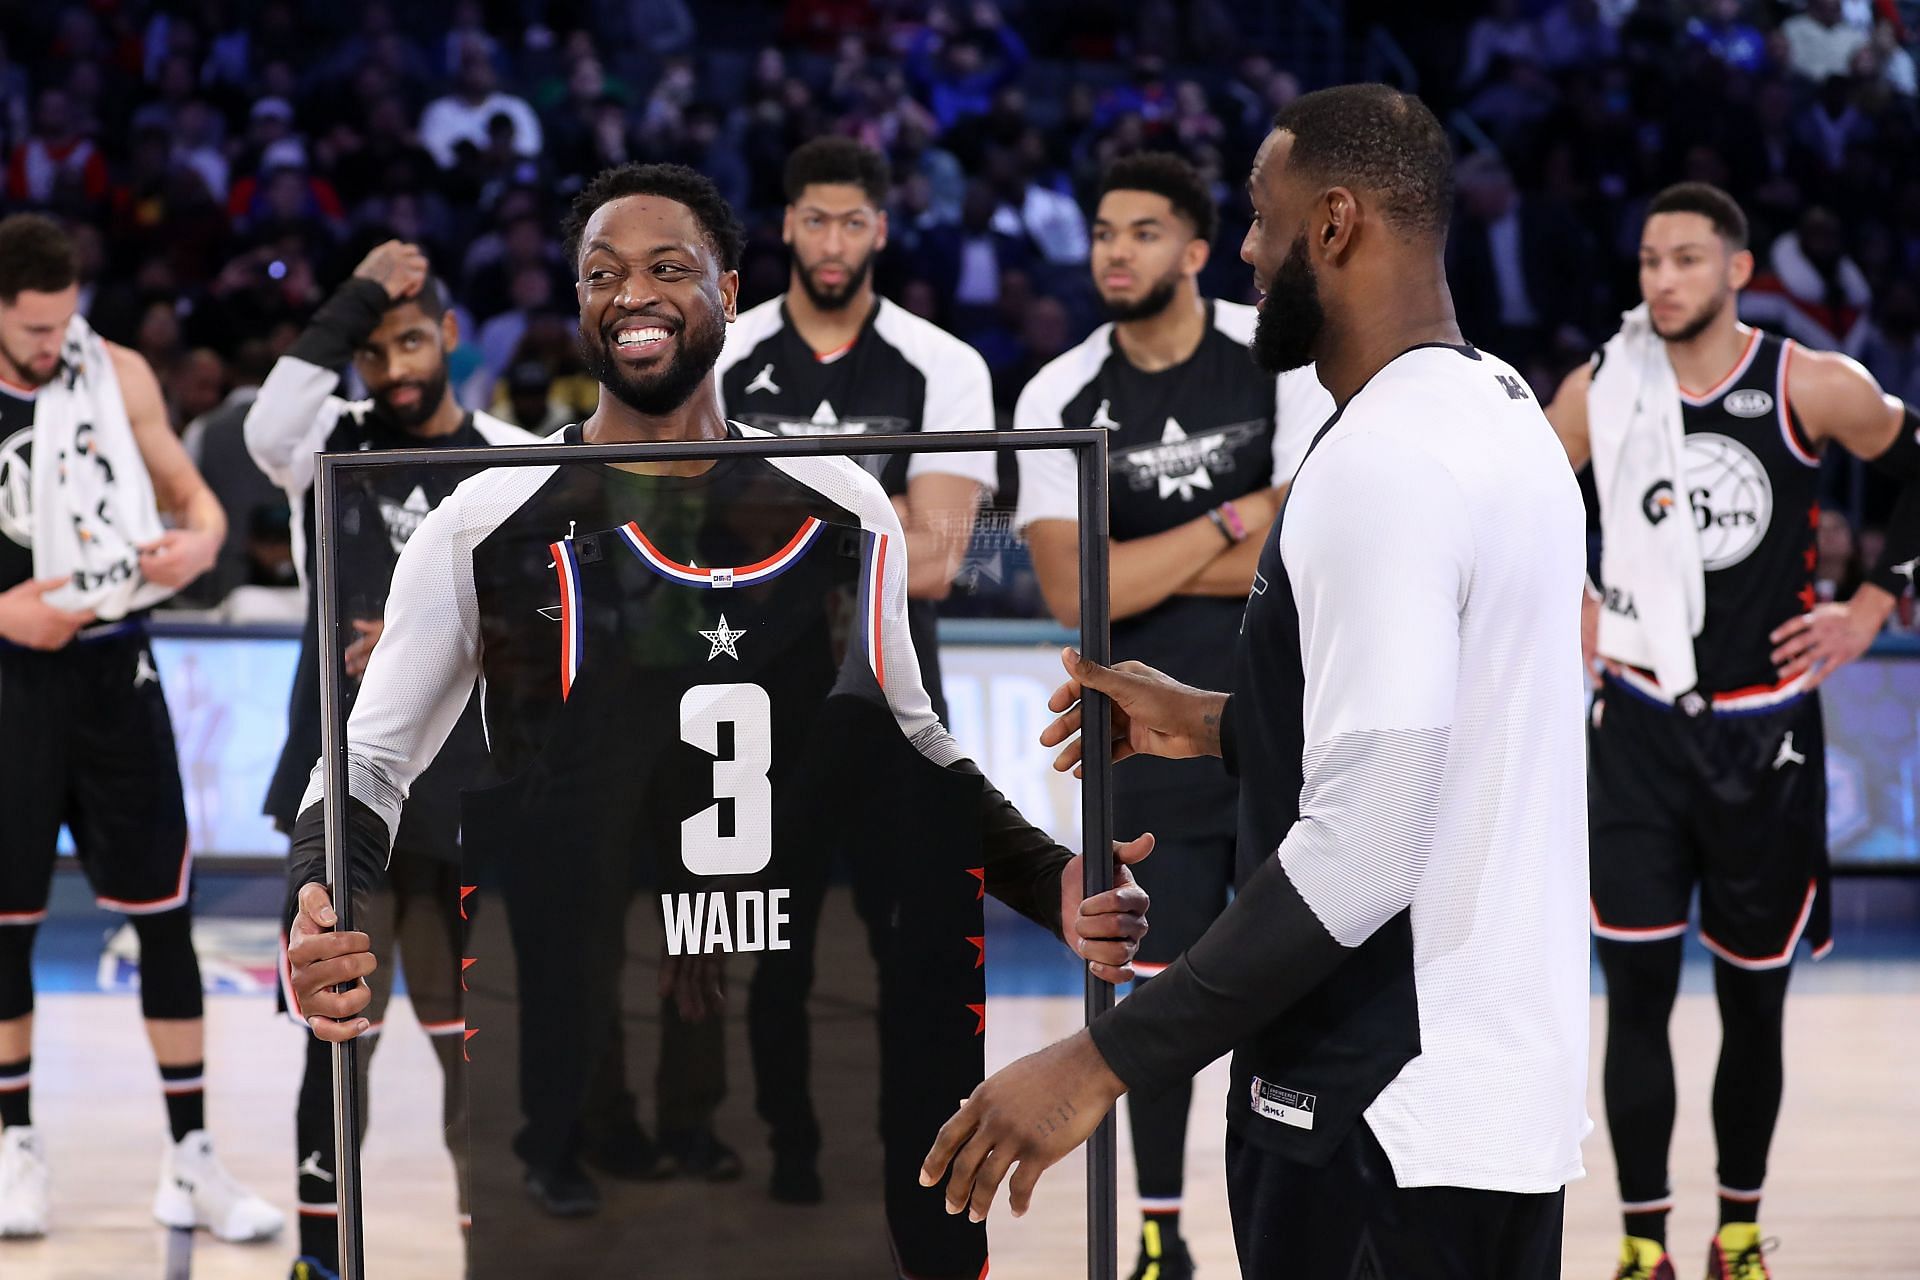 Dwyane Wade played in the 2019 NBA All-Star Game (Image via Getty Images)